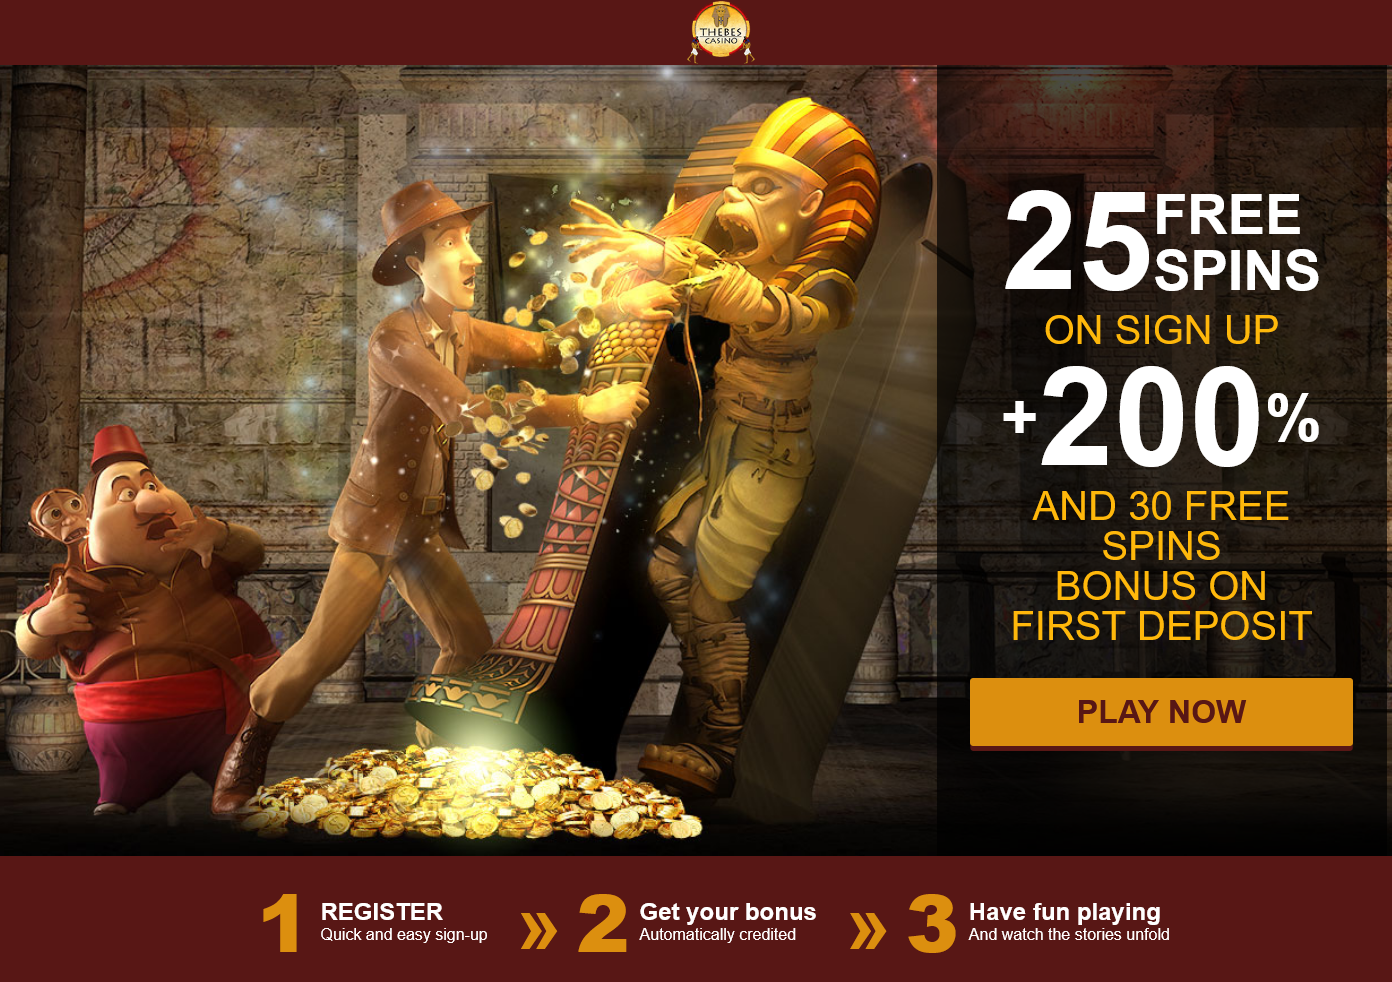 25 FREE SPINS ON SIGN UP